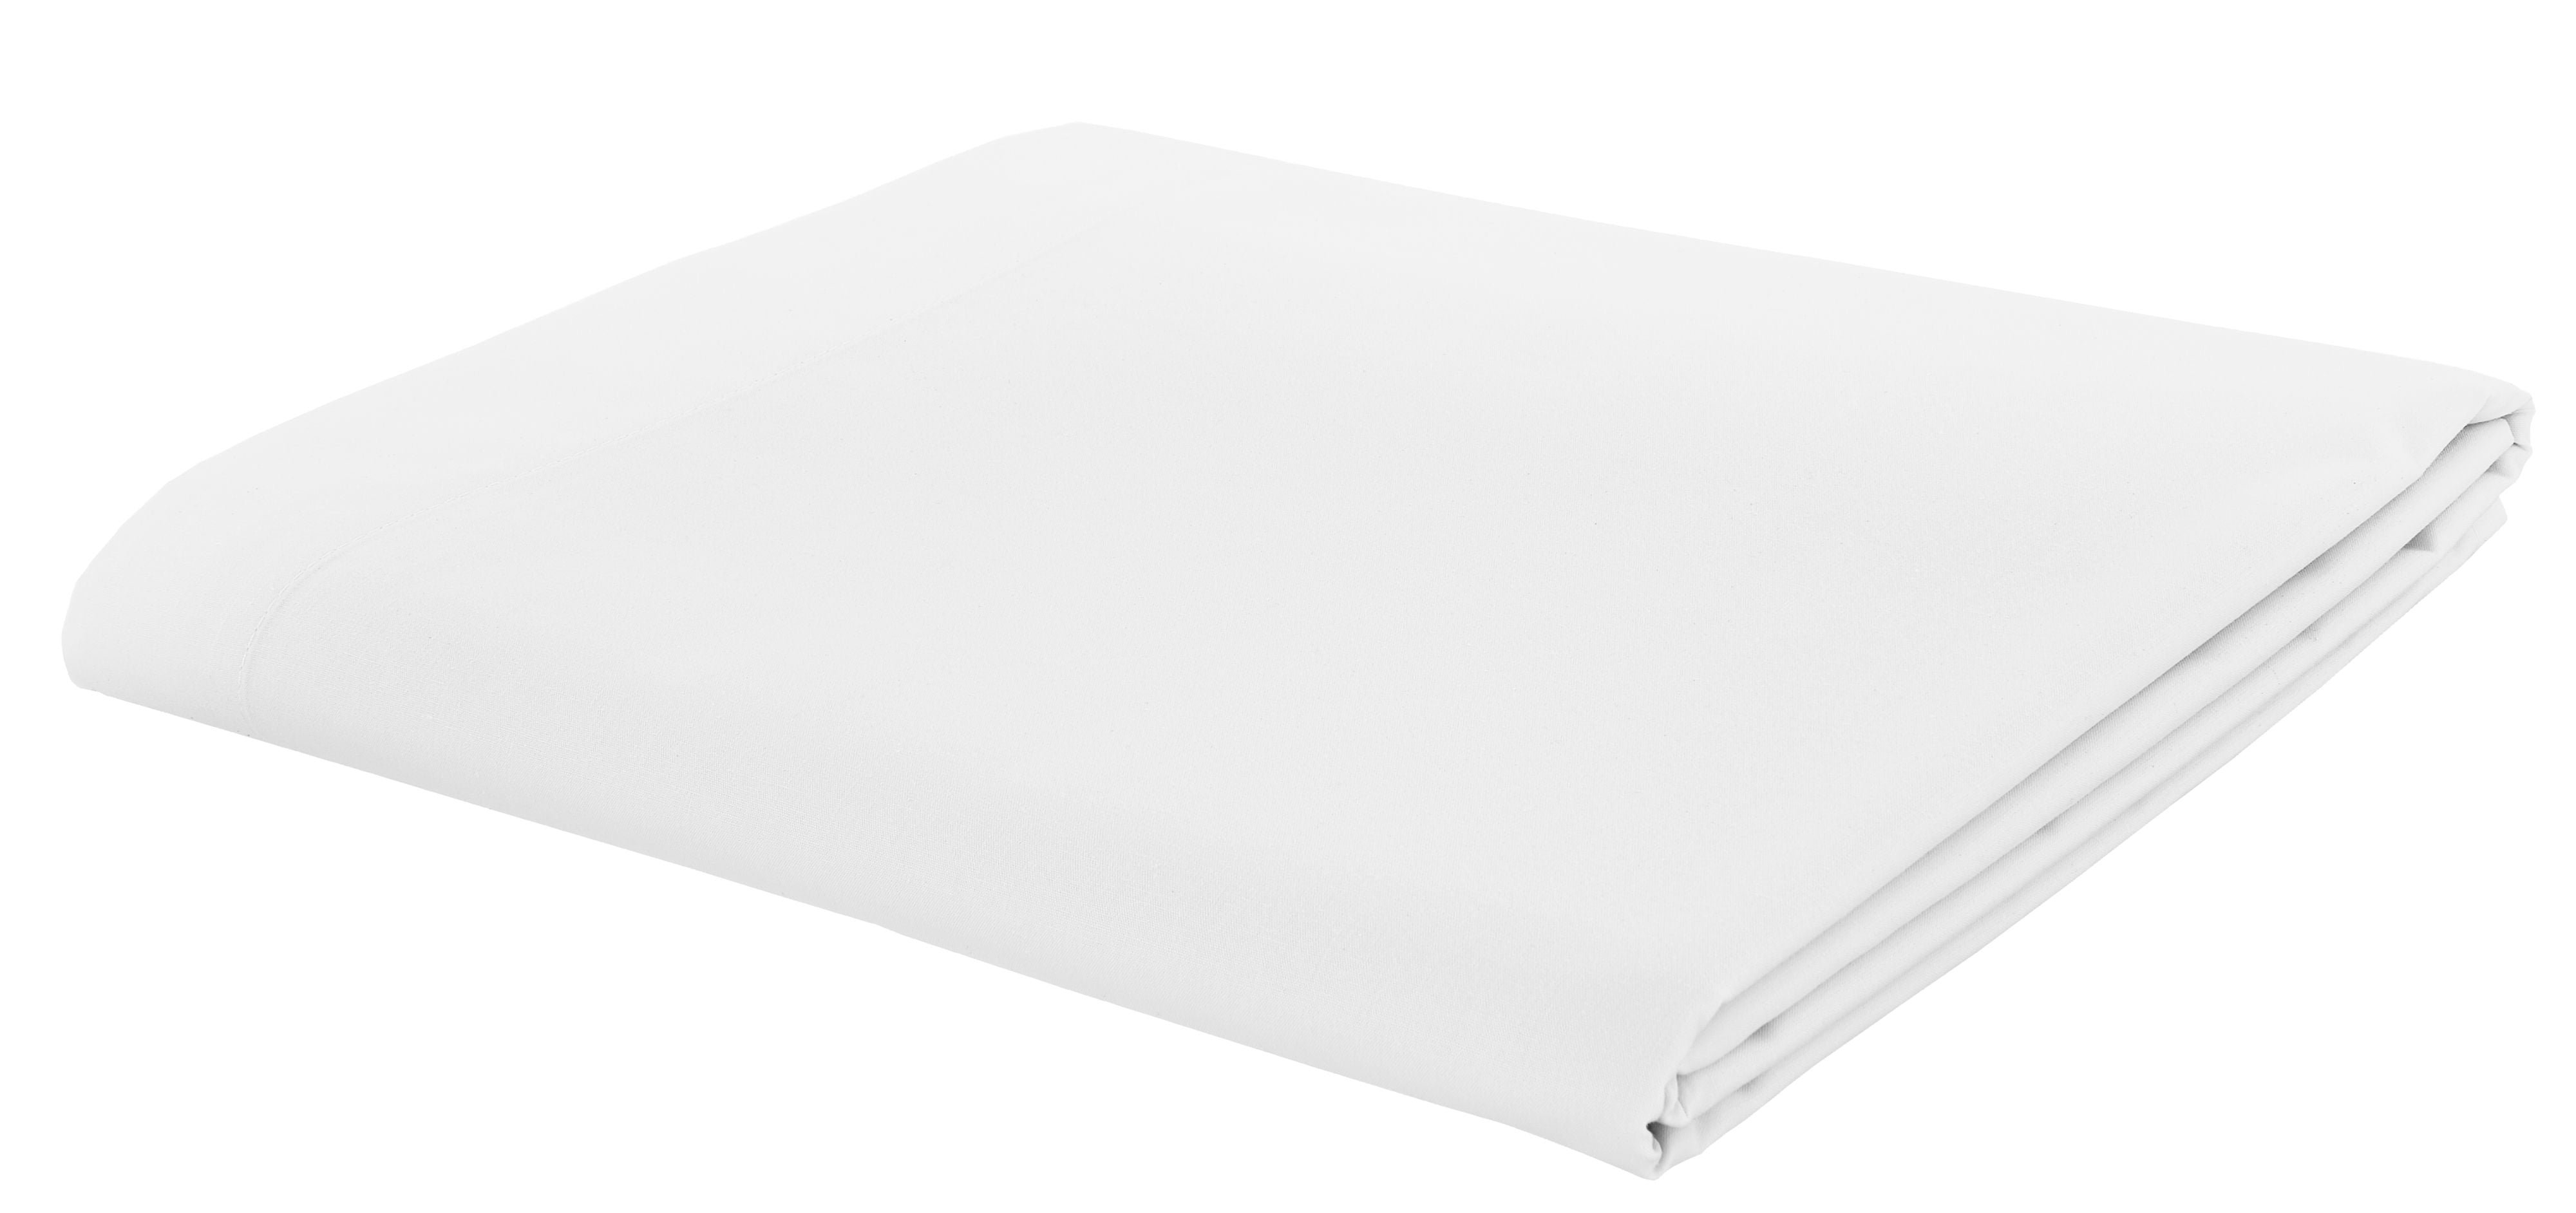 Catherine Lansfield Combed Percale Non-Iron Sheeting, White